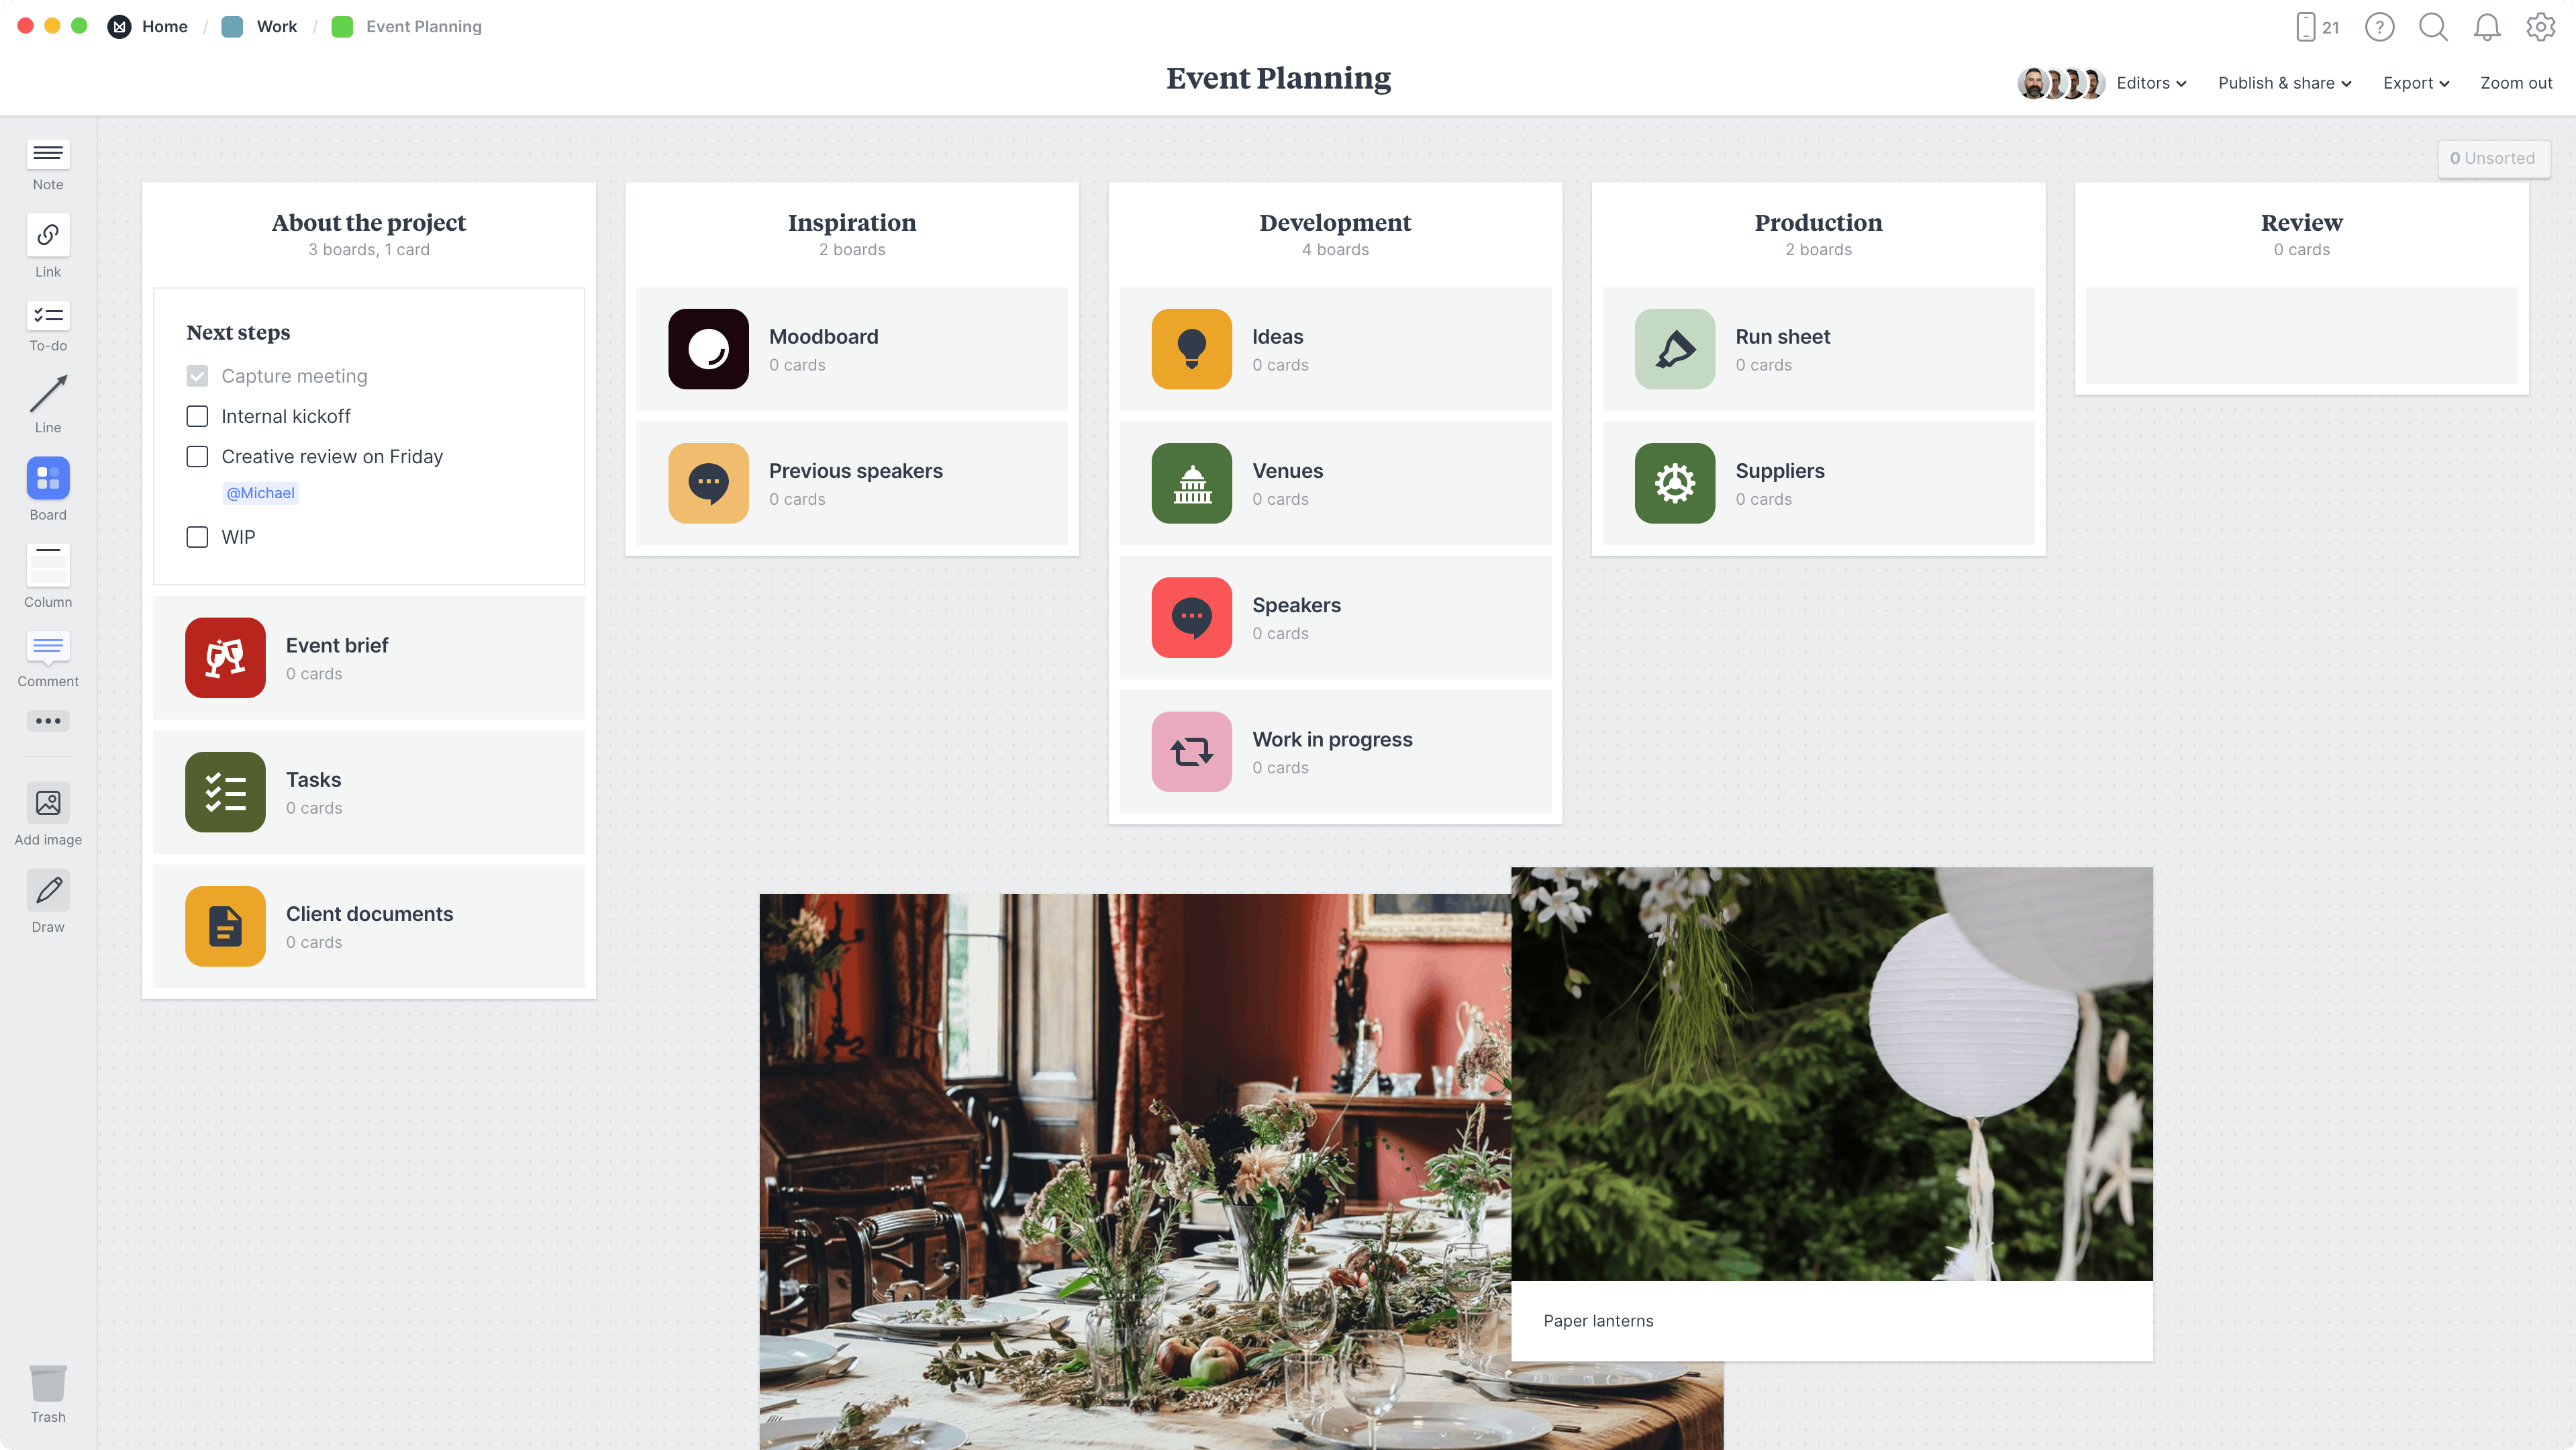 Event Planning Template, within the Milanote app